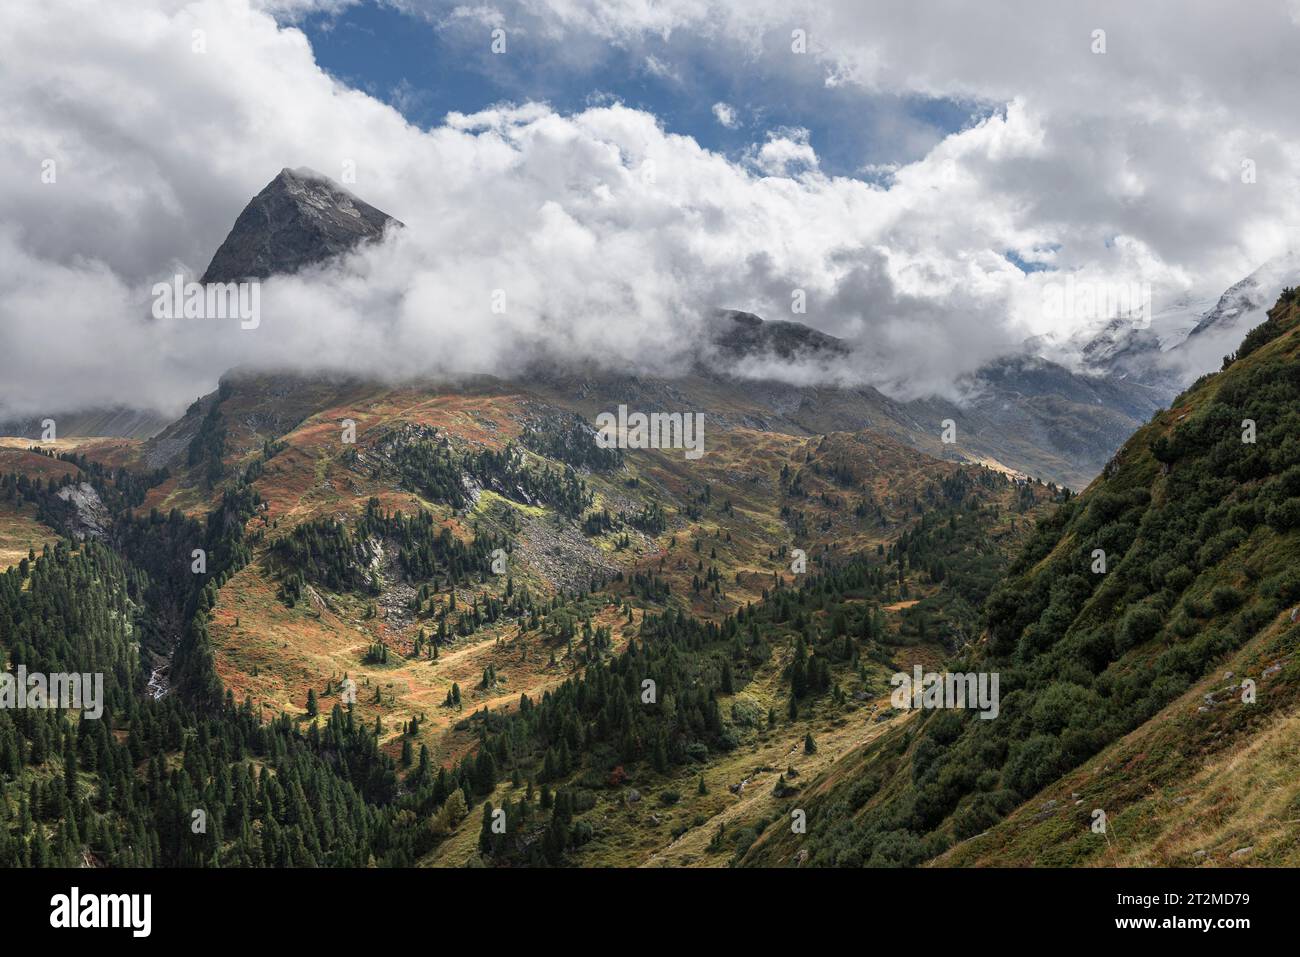 Clouds surround the mountain slopes of Mount Hangerer above the pine forests in the Gurgler Valley in autumn, Ötztal Alps, Tyrol, Austria Stock Photo